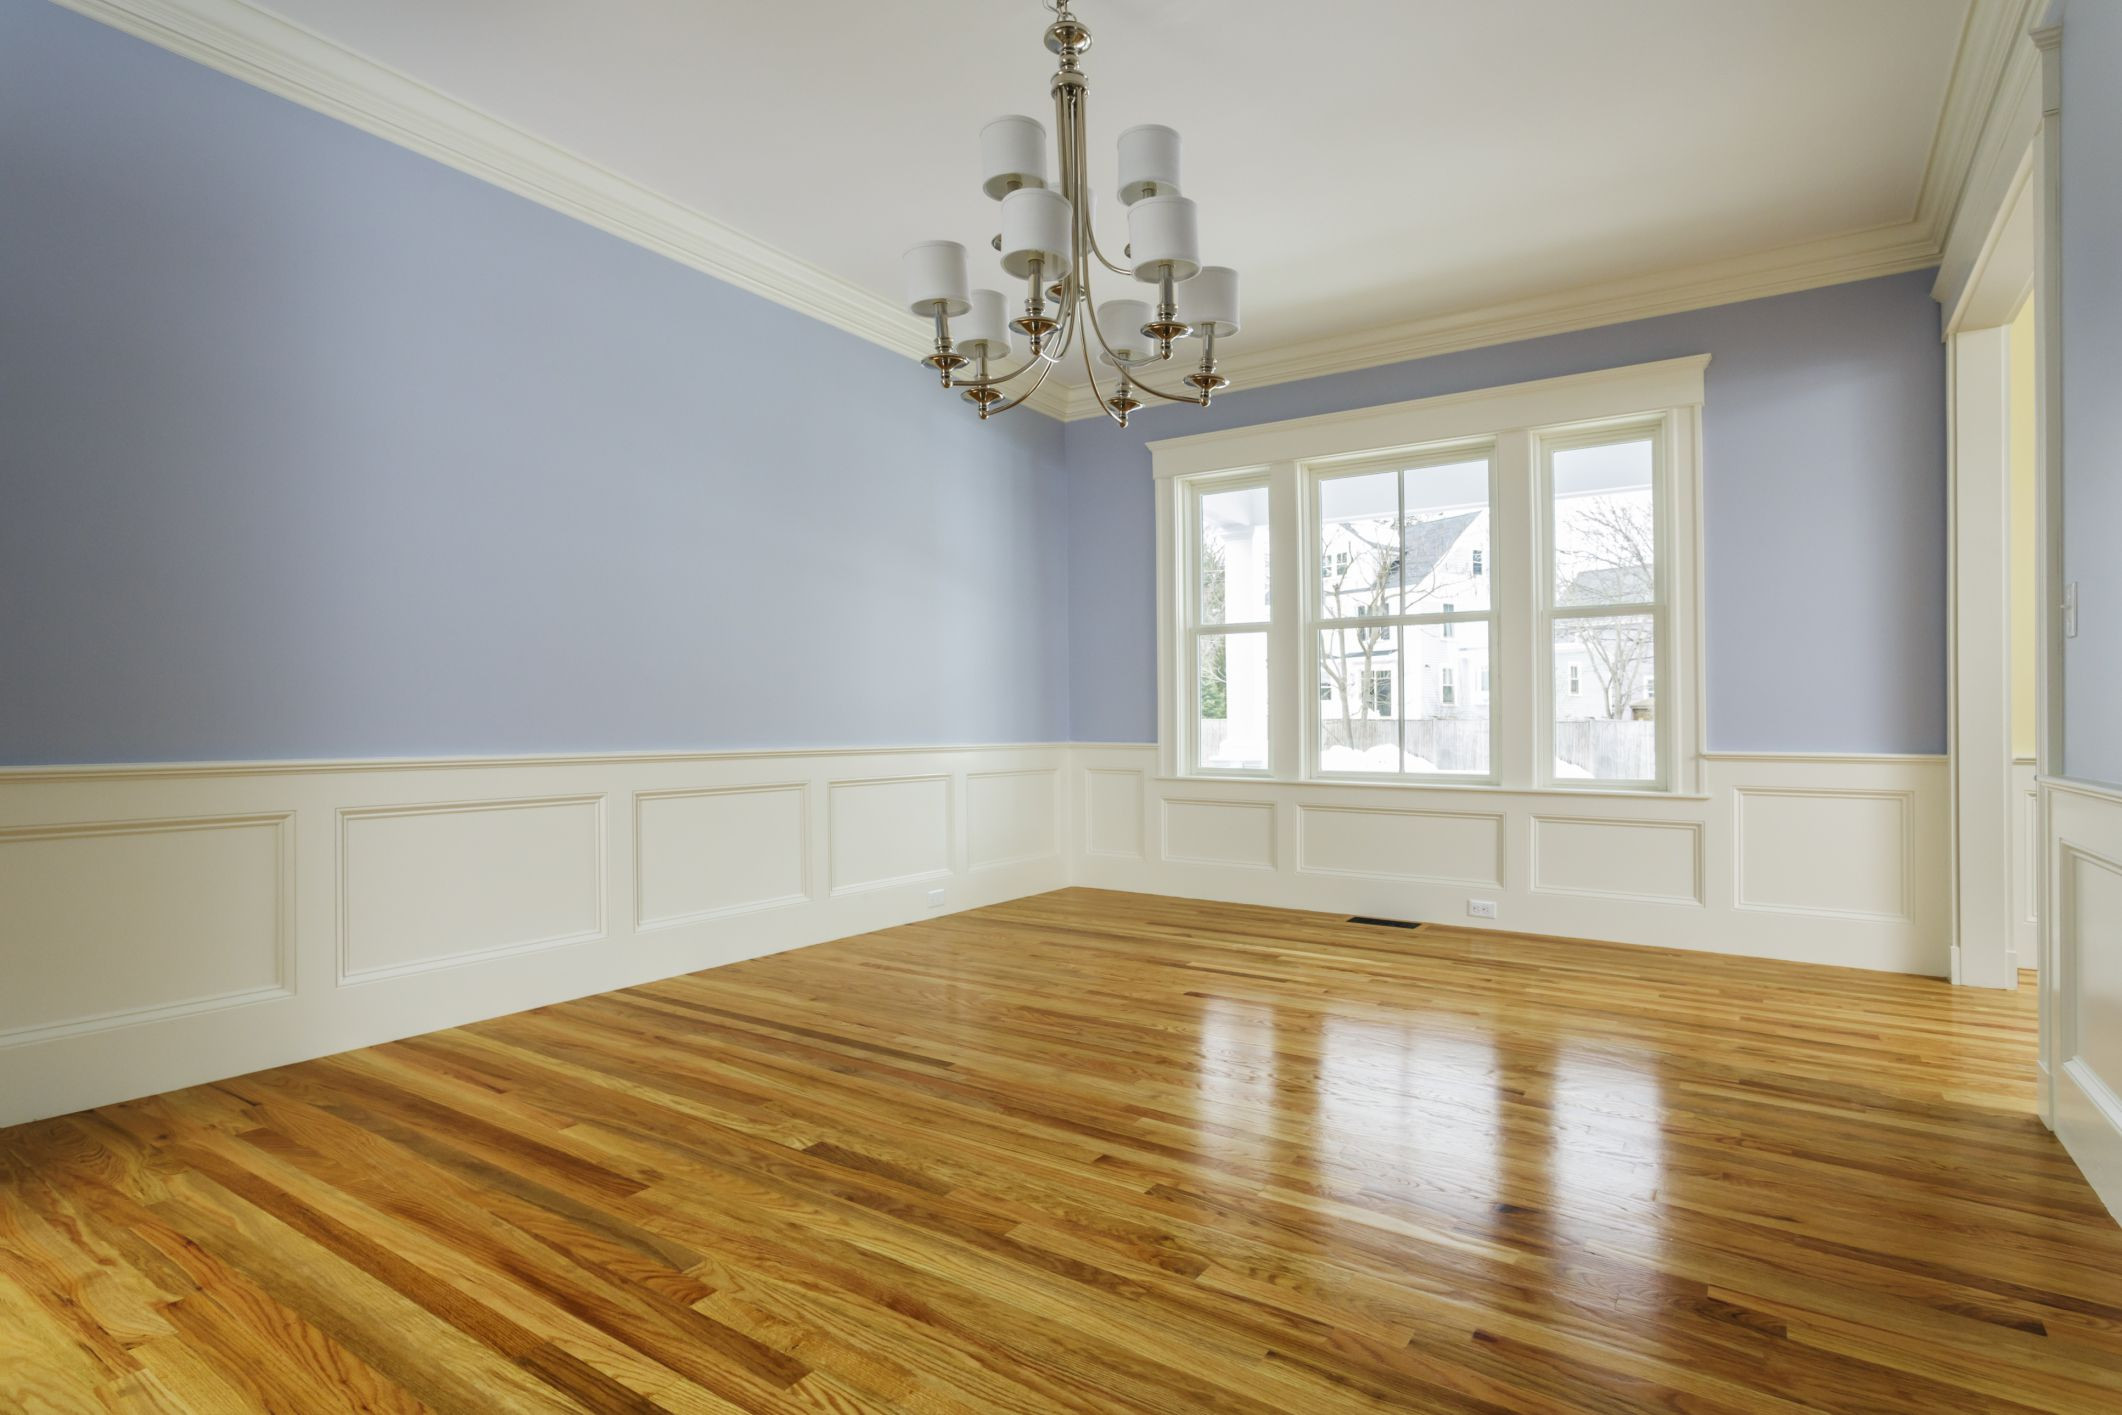 28 Fantastic How Much to Refinish Hardwood Floors Diy 2024 free download how much to refinish hardwood floors diy of the cost to refinish hardwood floors in 168686572 highres 56a2fd773df78cf7727b6cb3